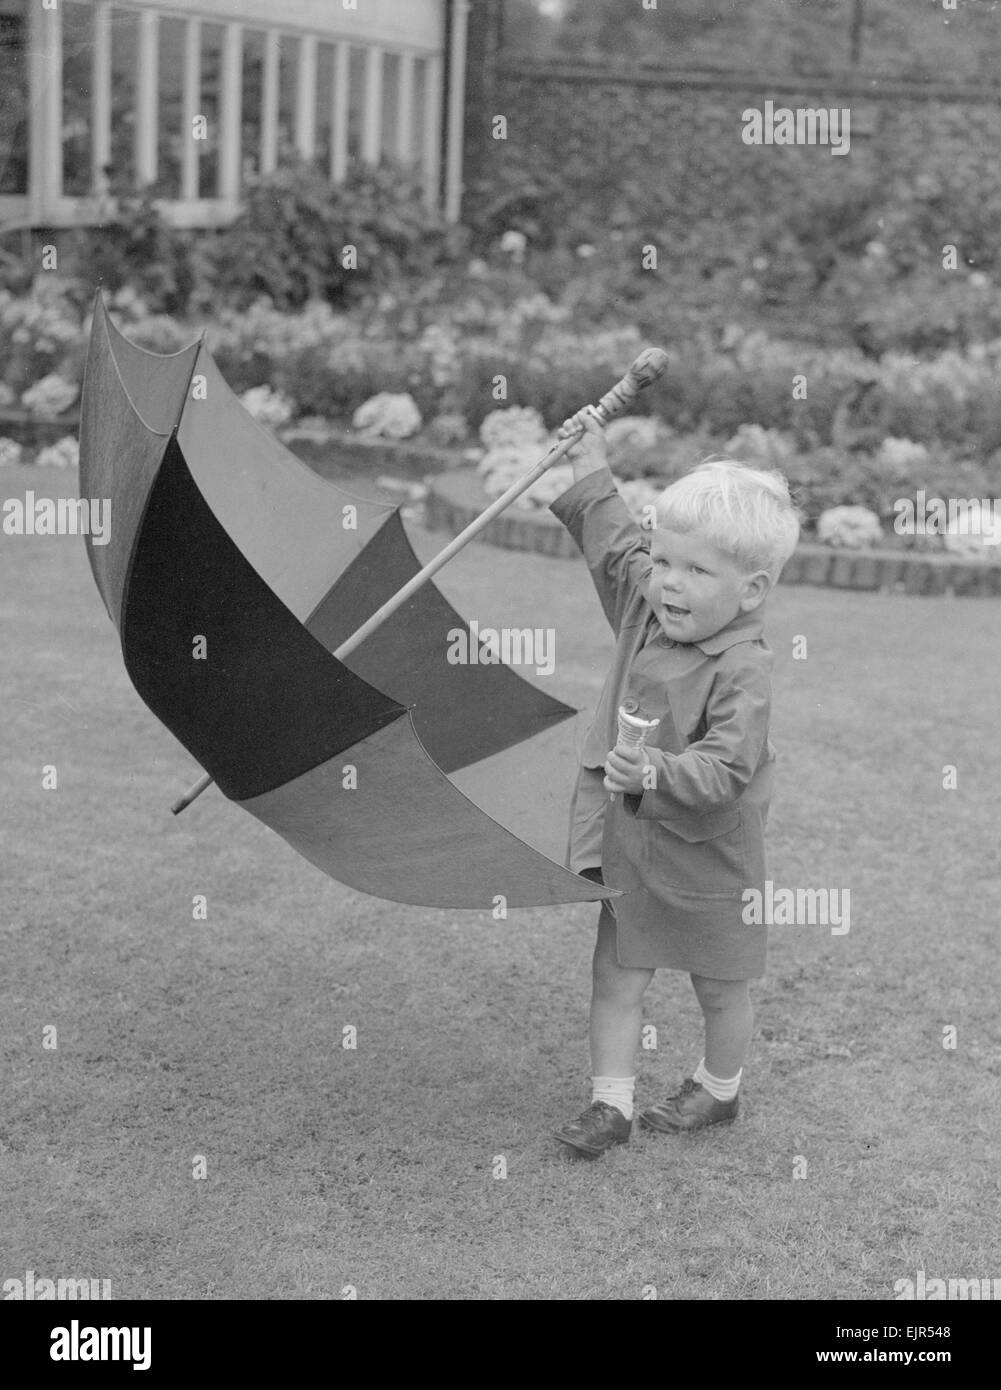 Two year old Angus Cameron seen here with umbrella and his ice cream cone. 30th July 1953 *** Local Caption *** watscan - - 12/01/2010 Stock Photo